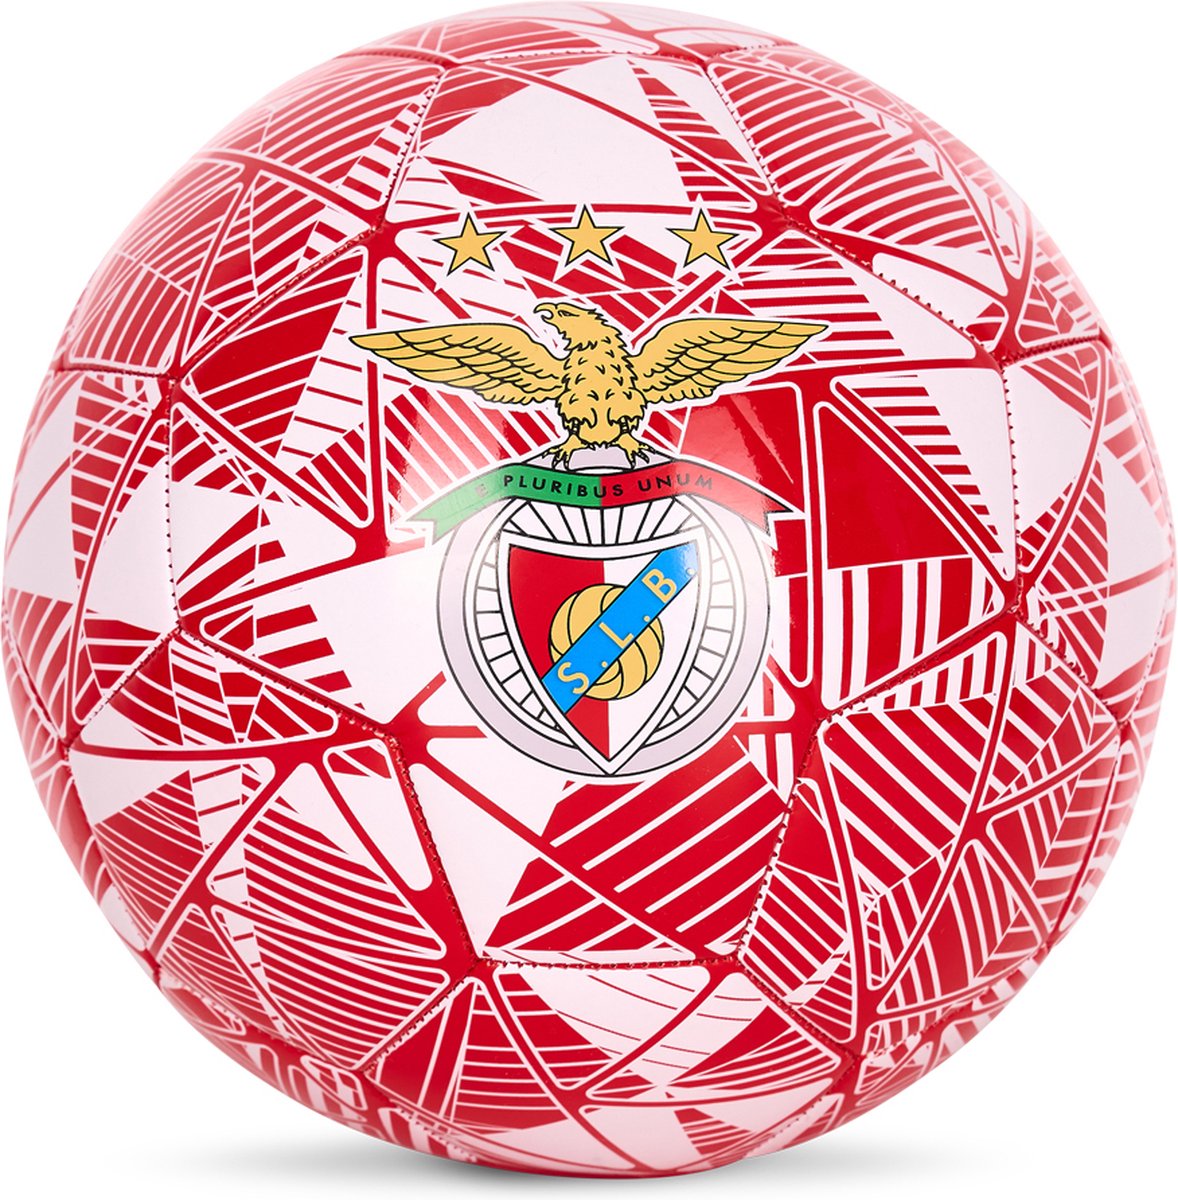 SL Benfica logo voetbal - One size - maat One size